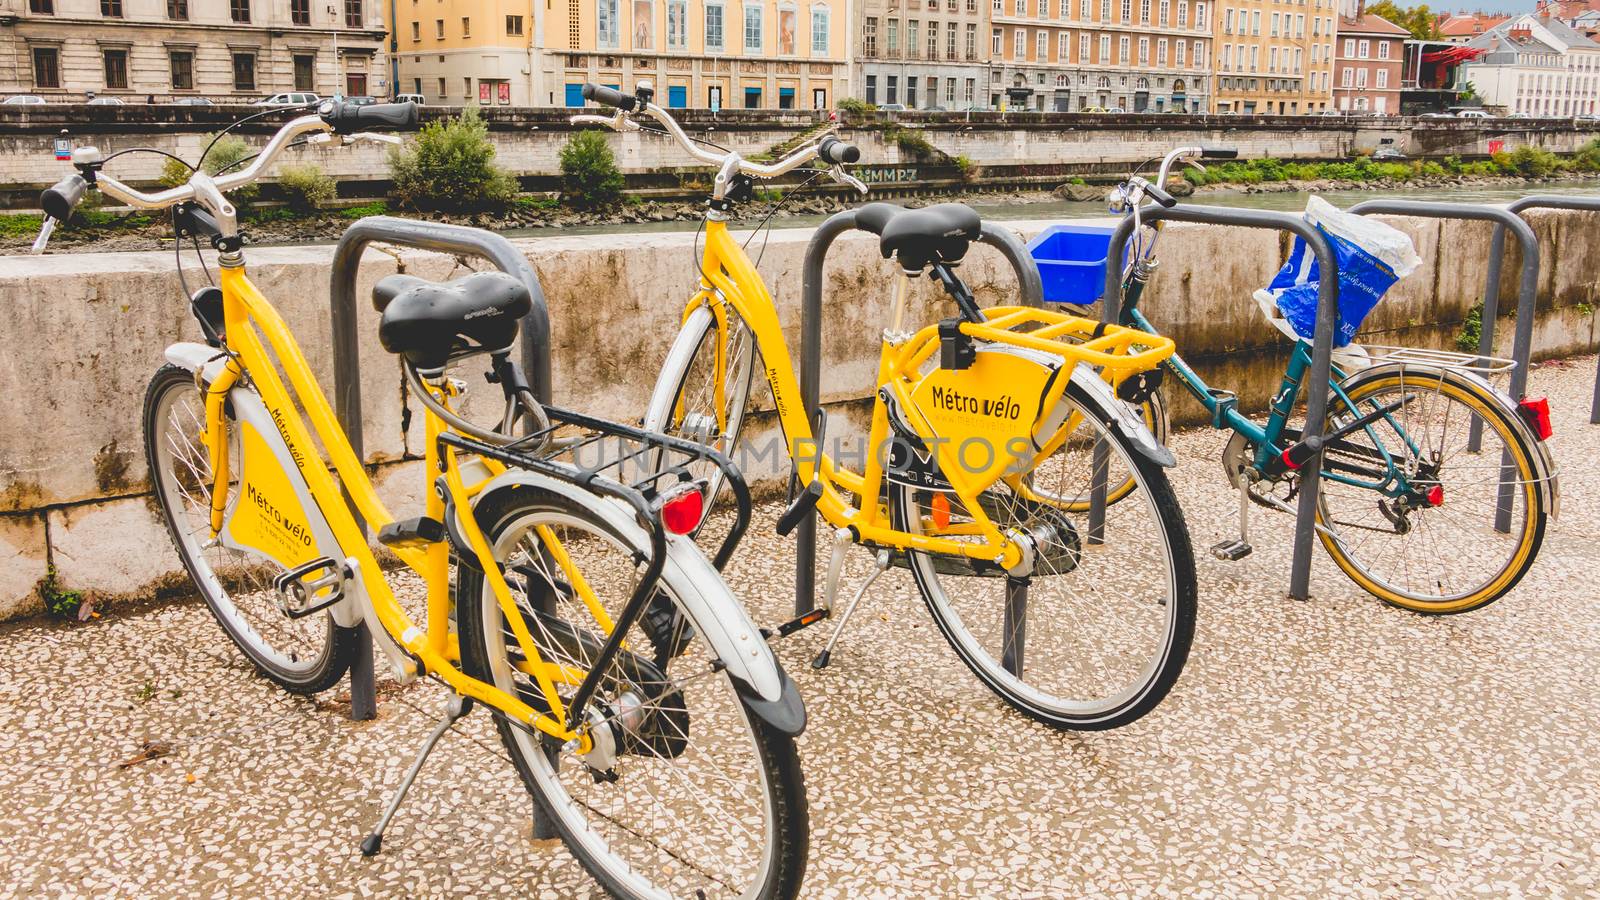 Grenoble, France - September 17, 2016 : Shared bikes are lined up in the streets of Grenoble, France. The successful Metrovelo service, launched in 2004, has over 800 stations and 4,000 bikes throughout Grenoble